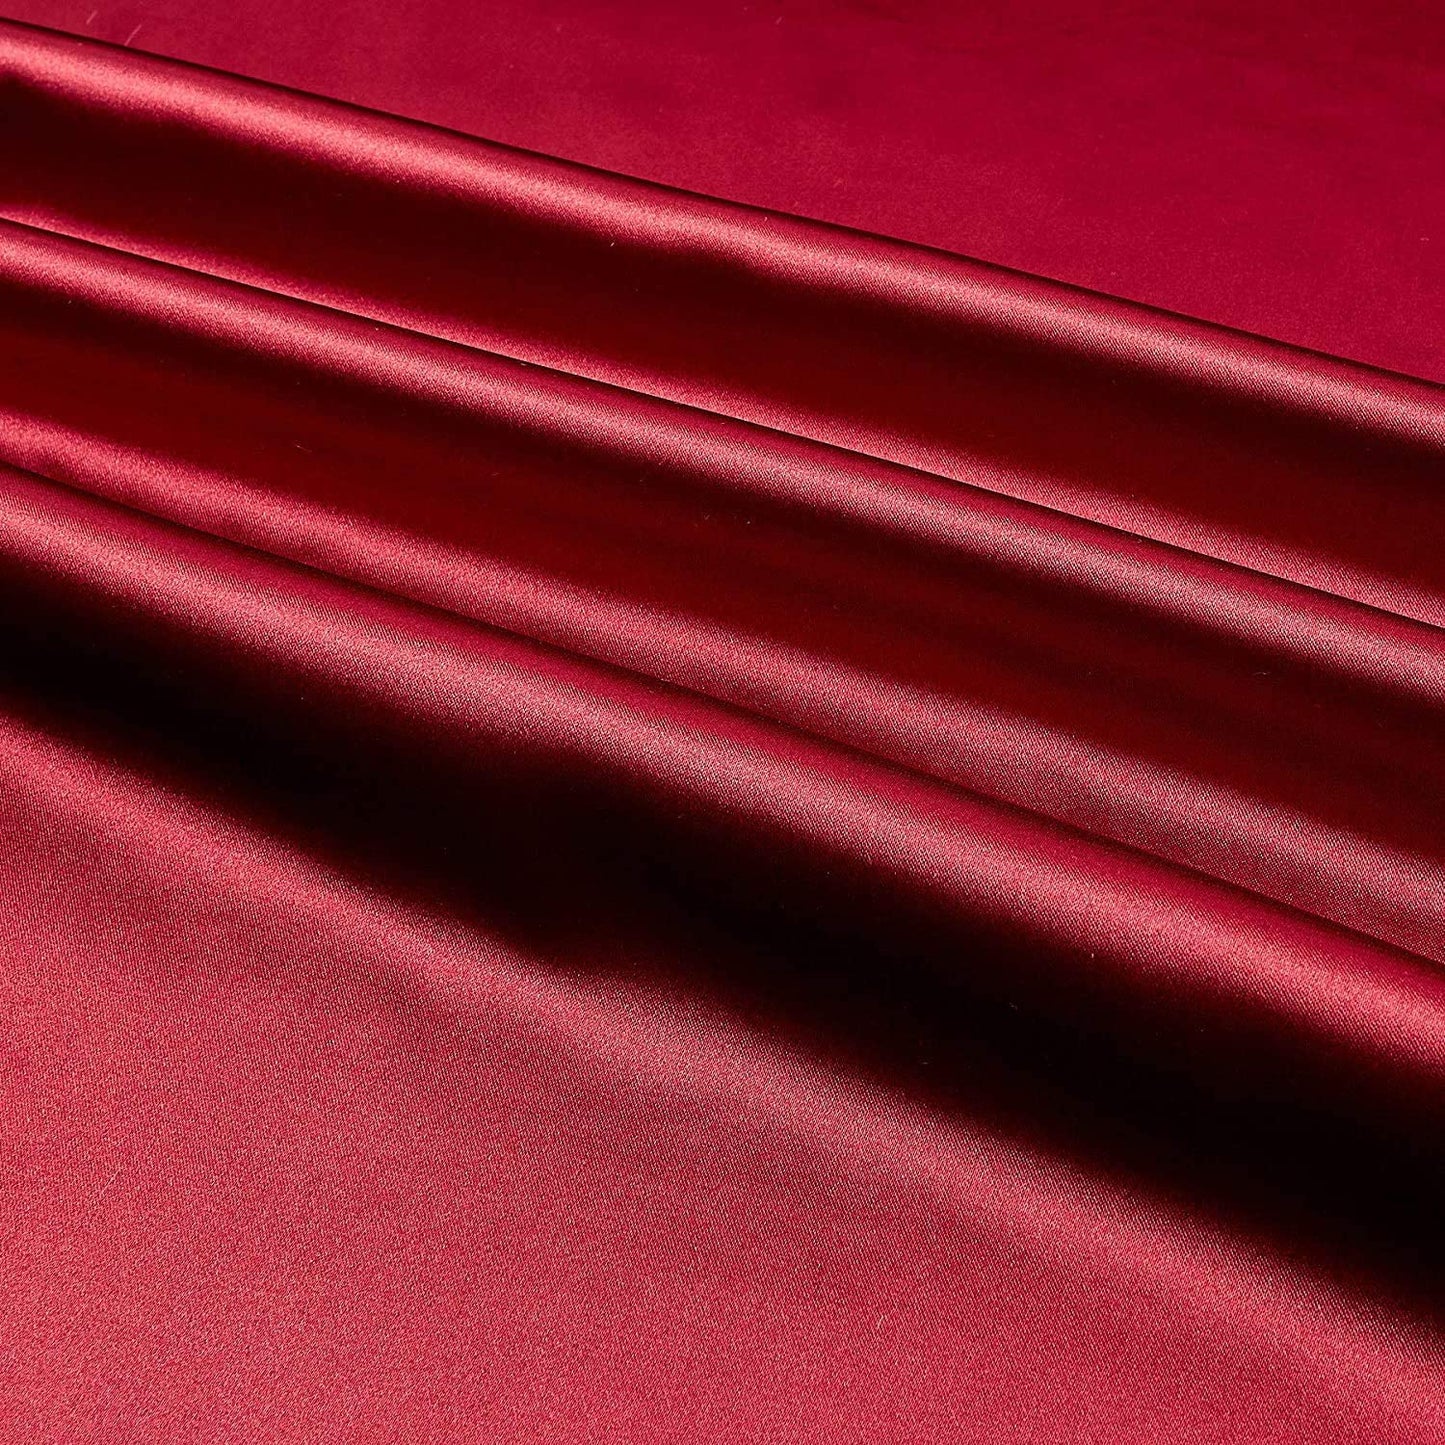 Spandex Light Weight Silky Stretch Charmeuse Satin Fabric (Cranberry 633,